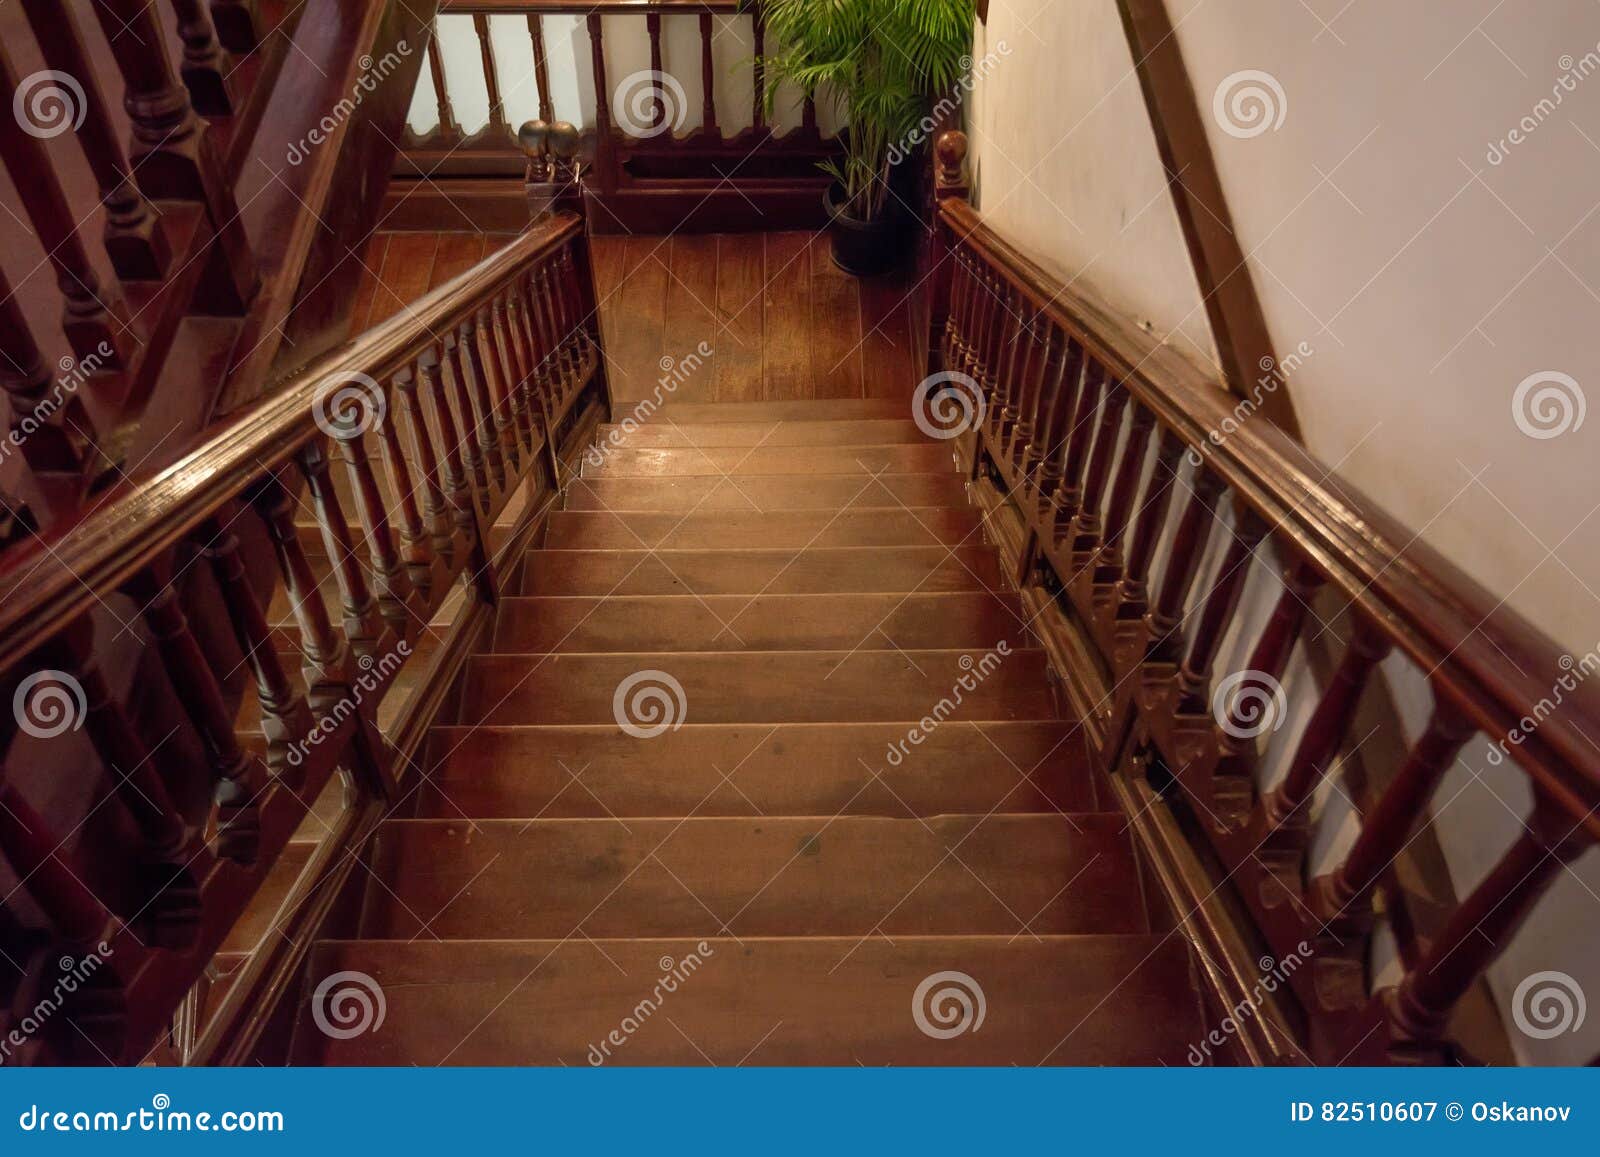 brown wooden staircase